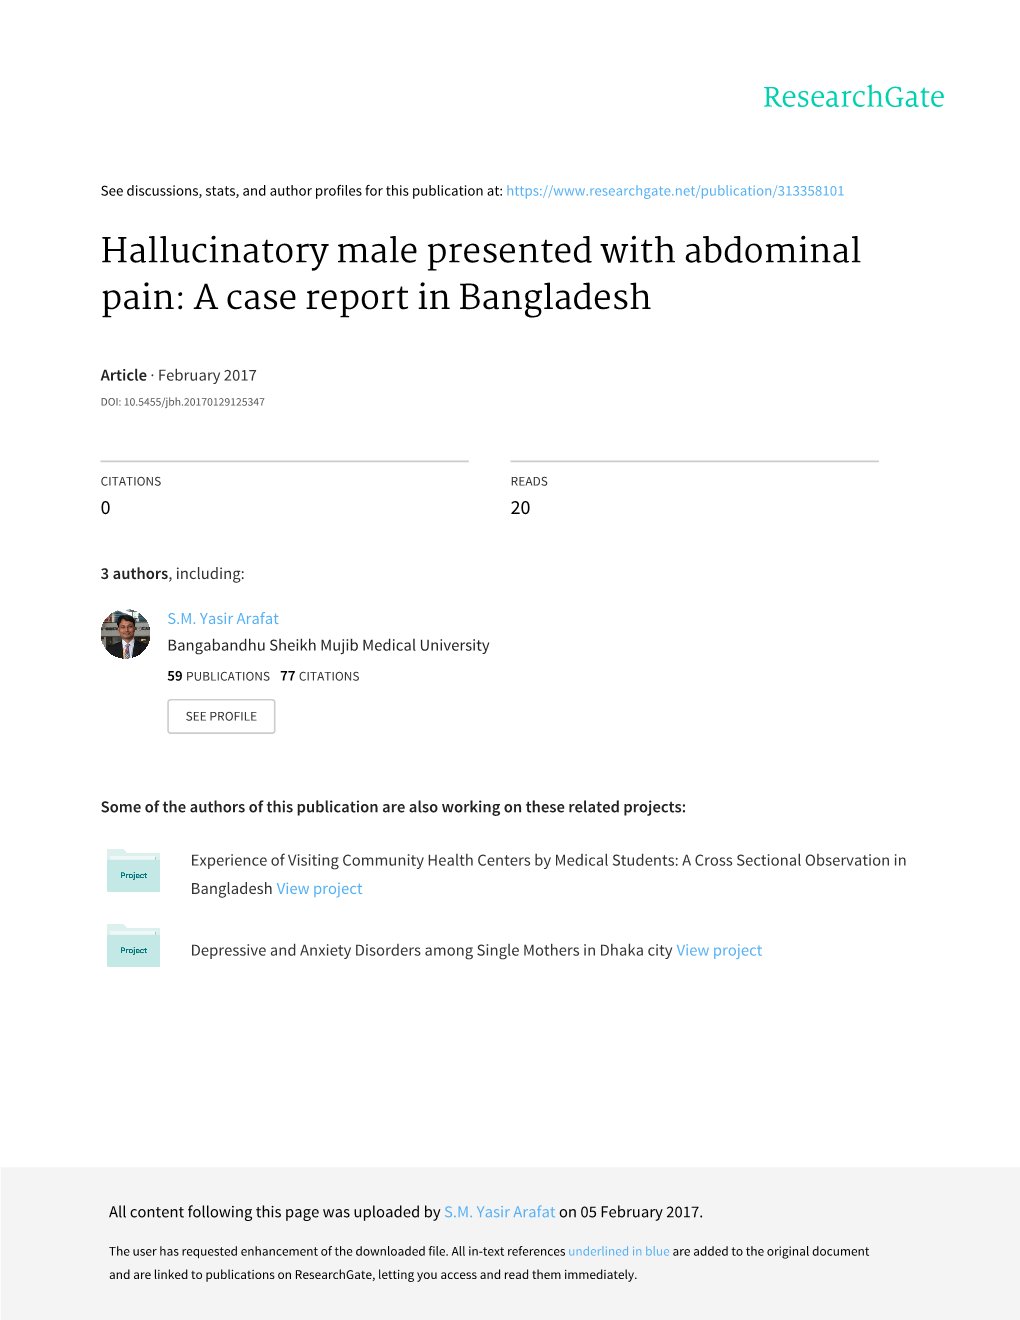 Hallucinatory Male Presented with Abdominal Pain: a Case Report in Bangladesh